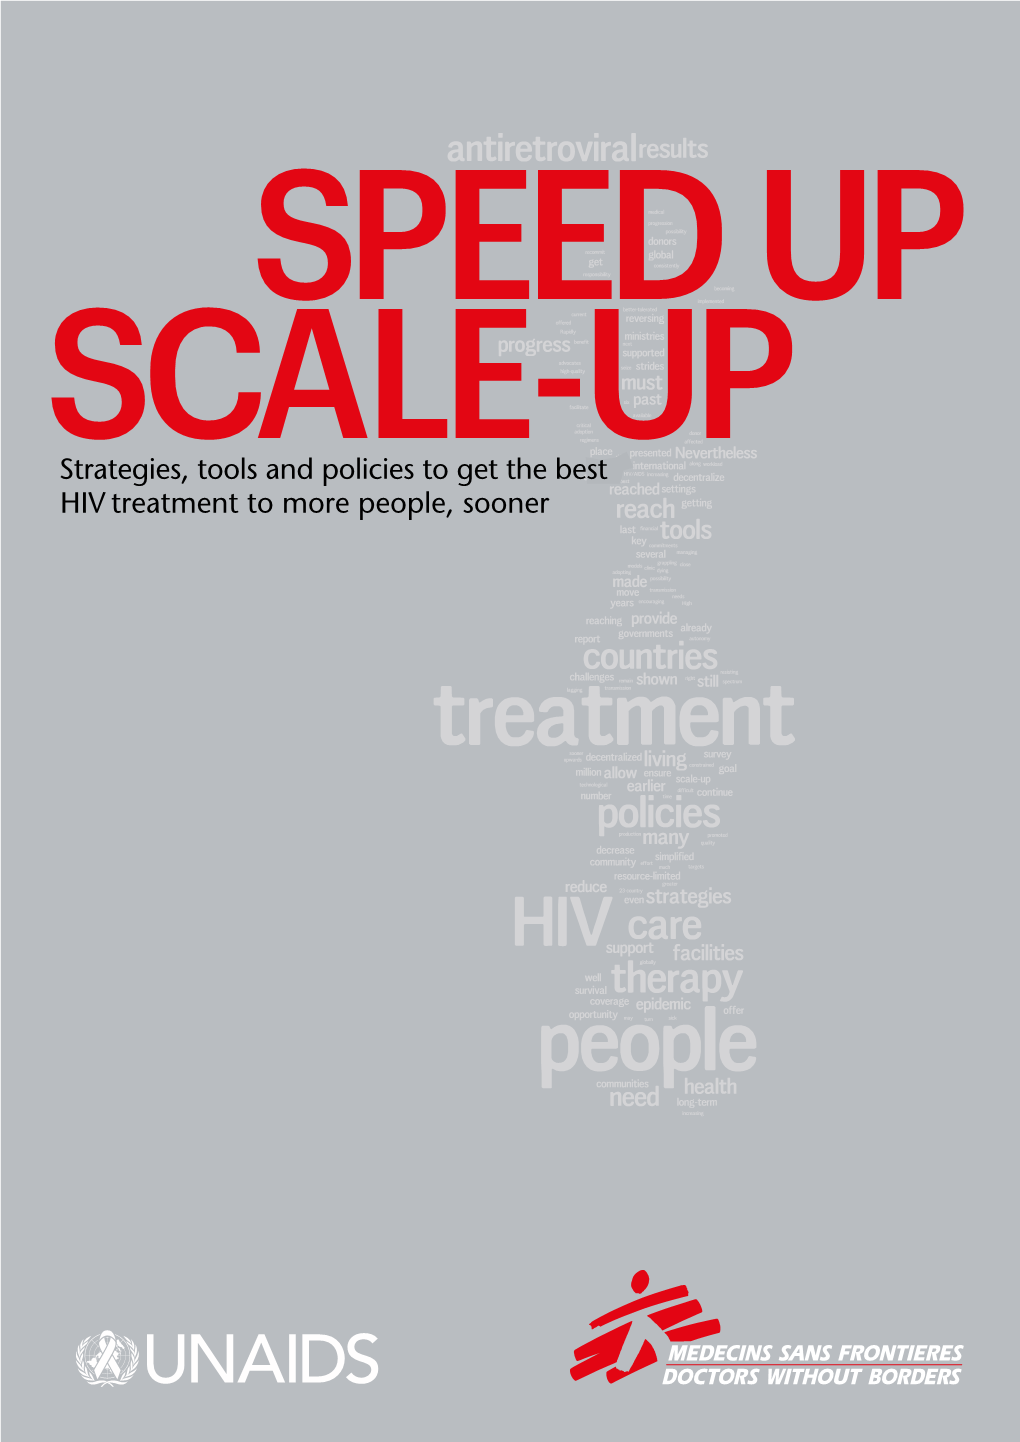 Strategies, Tools and Policies to Get the Best HIV Treatment to More People, Sooner Contents